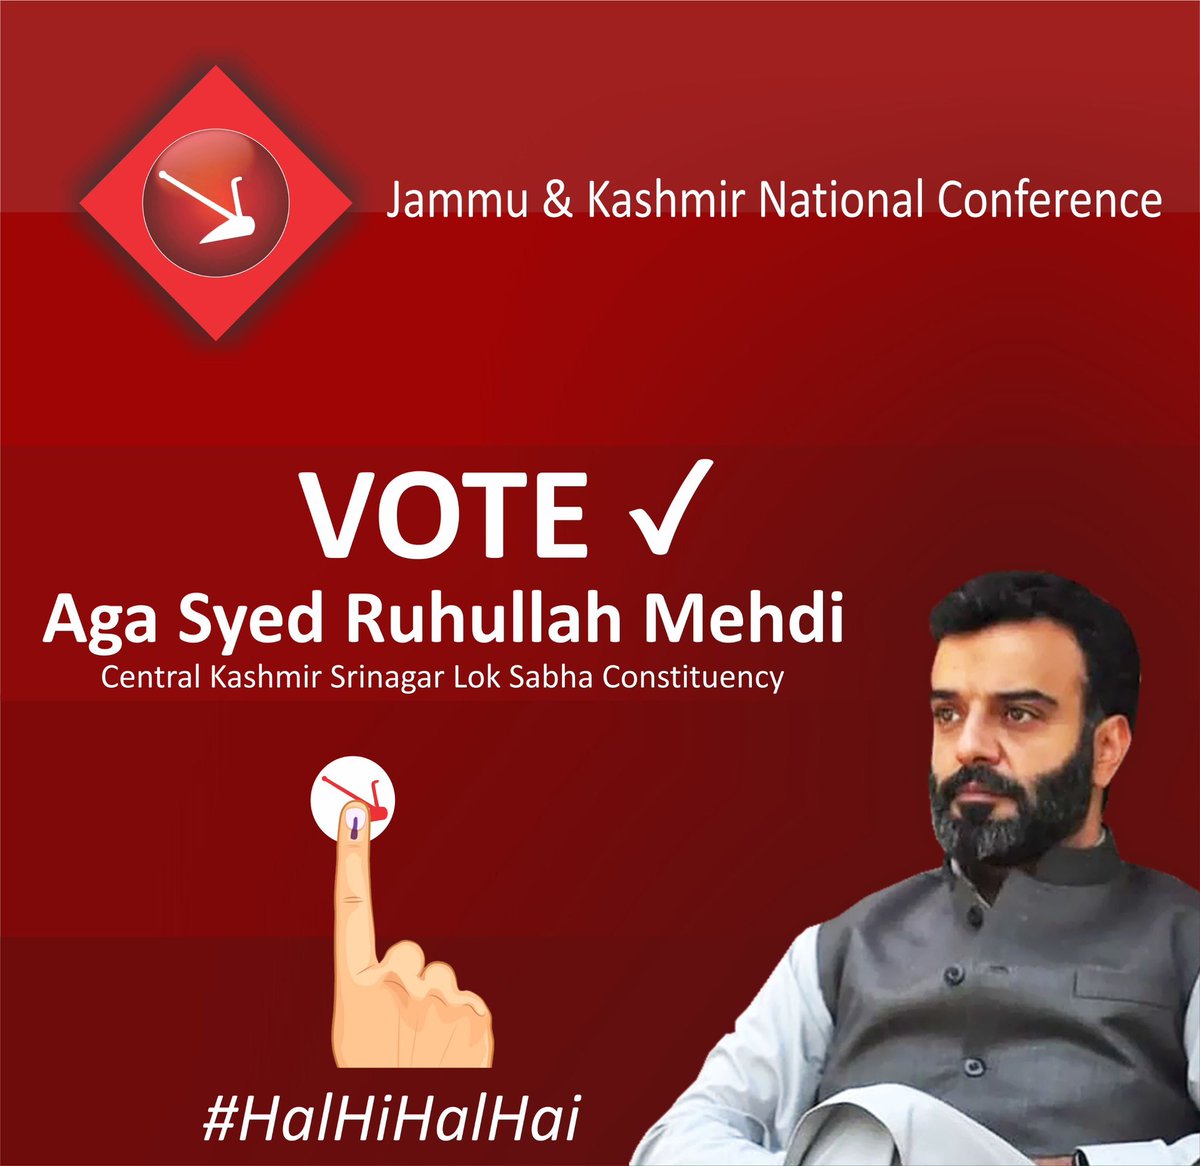 Vote for Agha Syed Ruhulla Mehdi on 13th May! Inshallah!